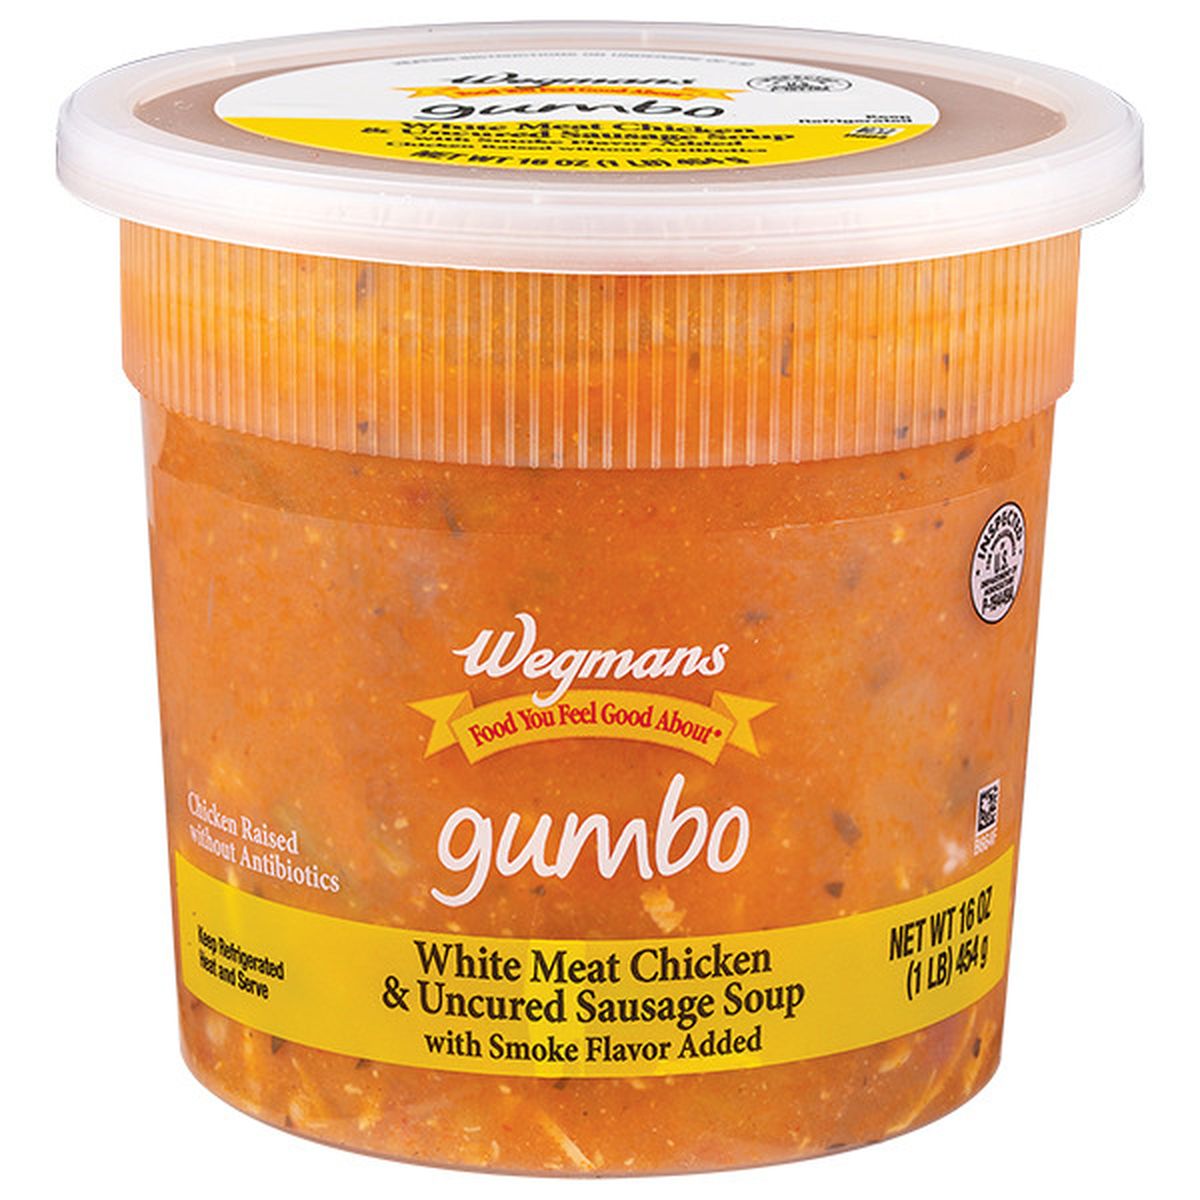 Calories in Wegmans Gumbo White Meat Chicken & Uncured Sausage Soup